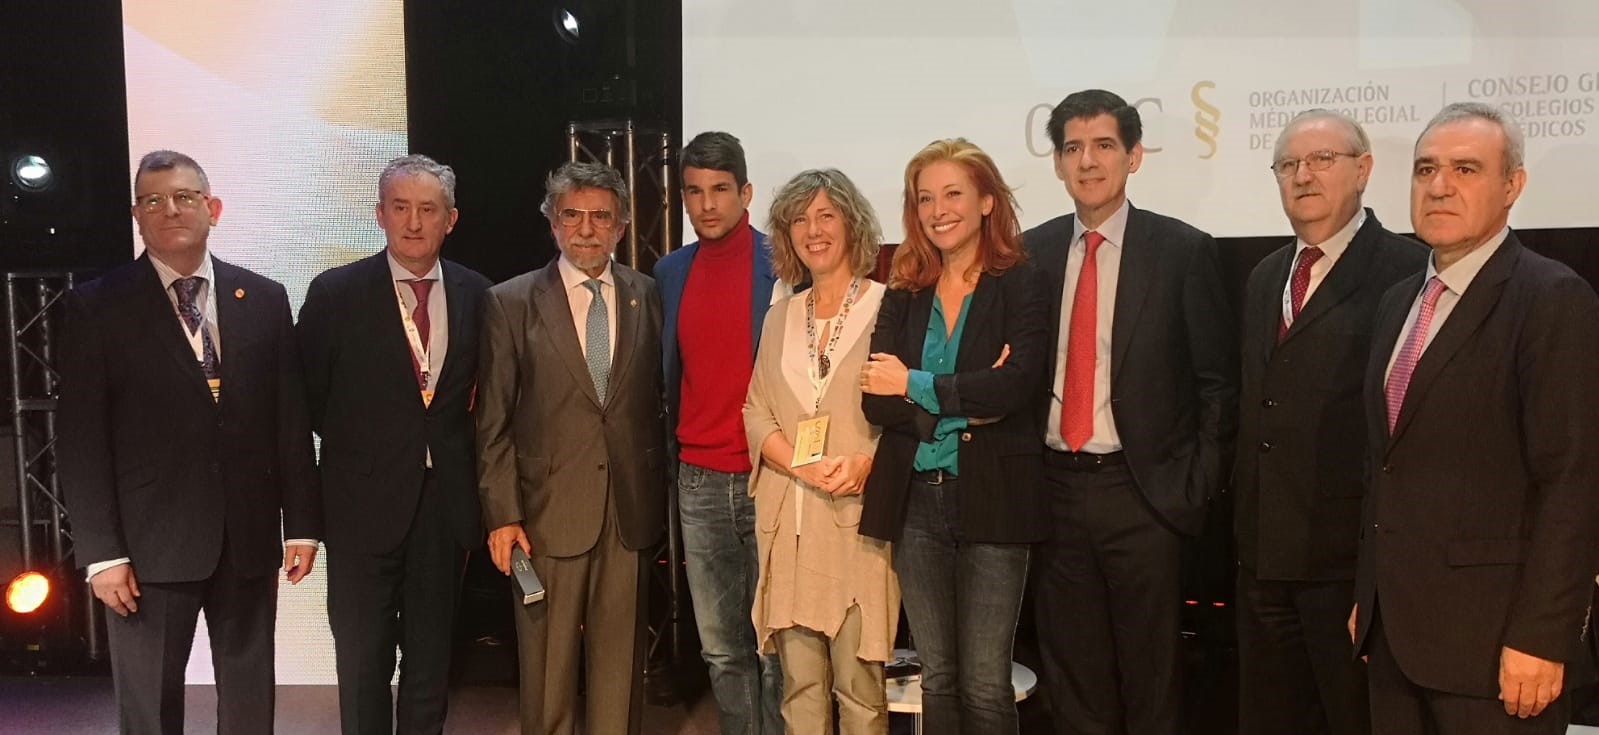 Participants in the round table 'Doctors and patients: a relationship of trust': Dr. Antonio Escribano (third from the left) with José María Manzanares and the journalist Teresa Viejo with Dr Piñal on his right